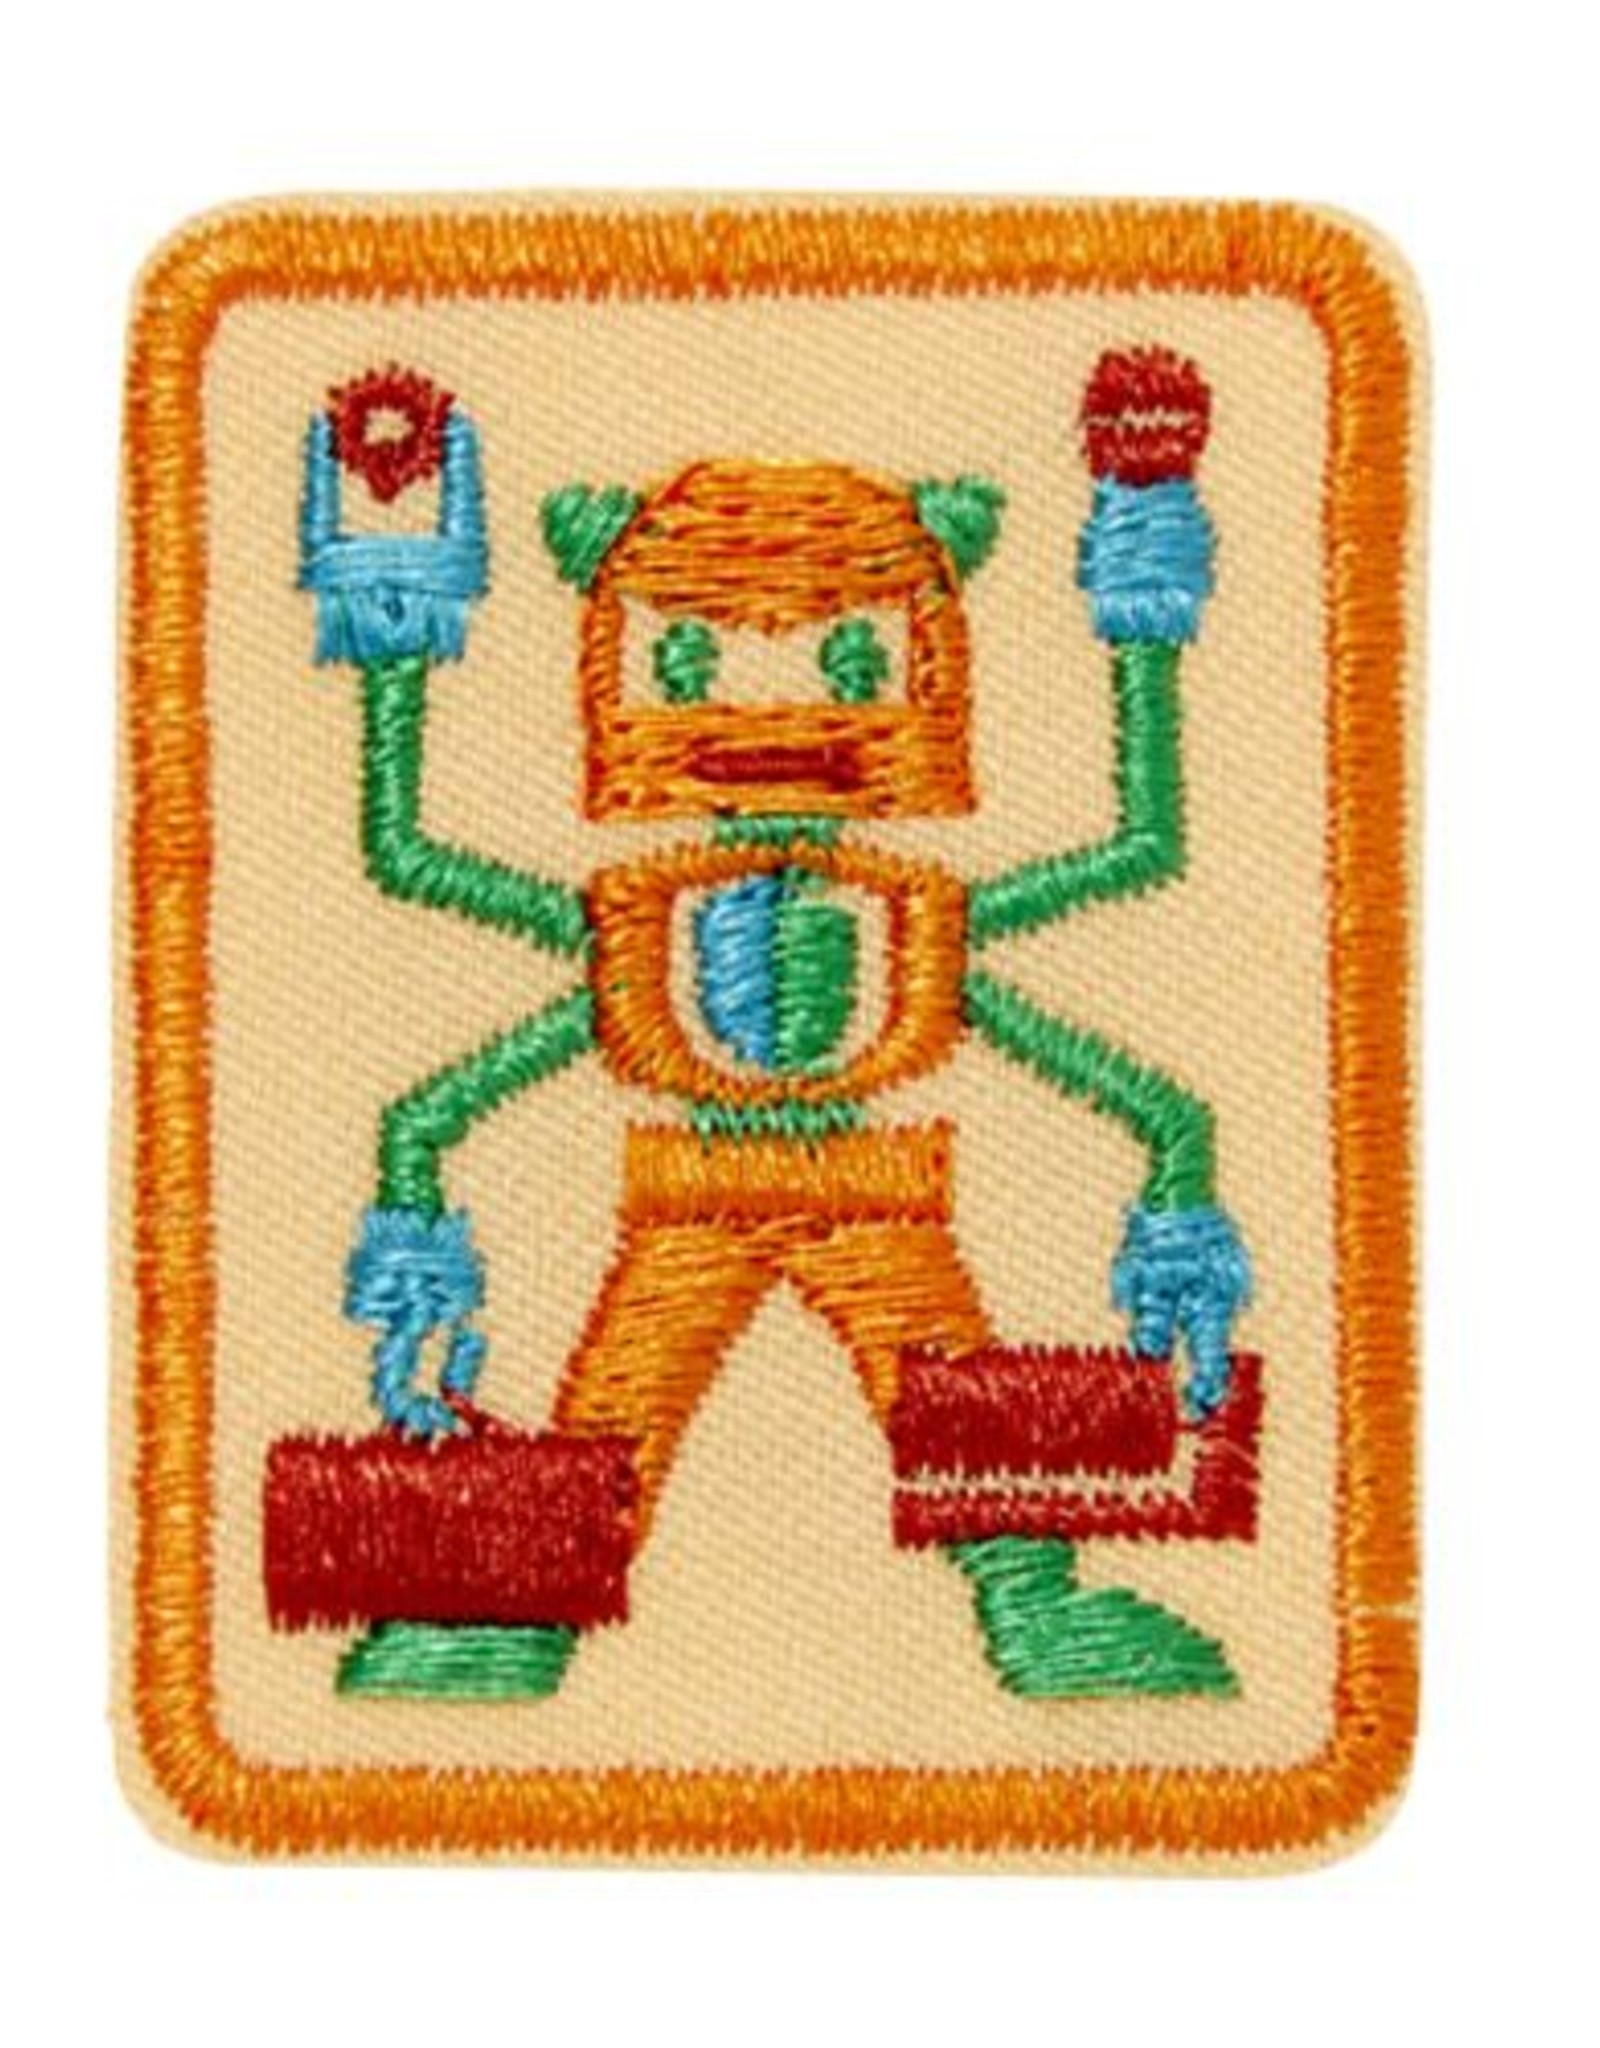 GIRL SCOUTS OF THE USA Senior Showcasing Robots Badge